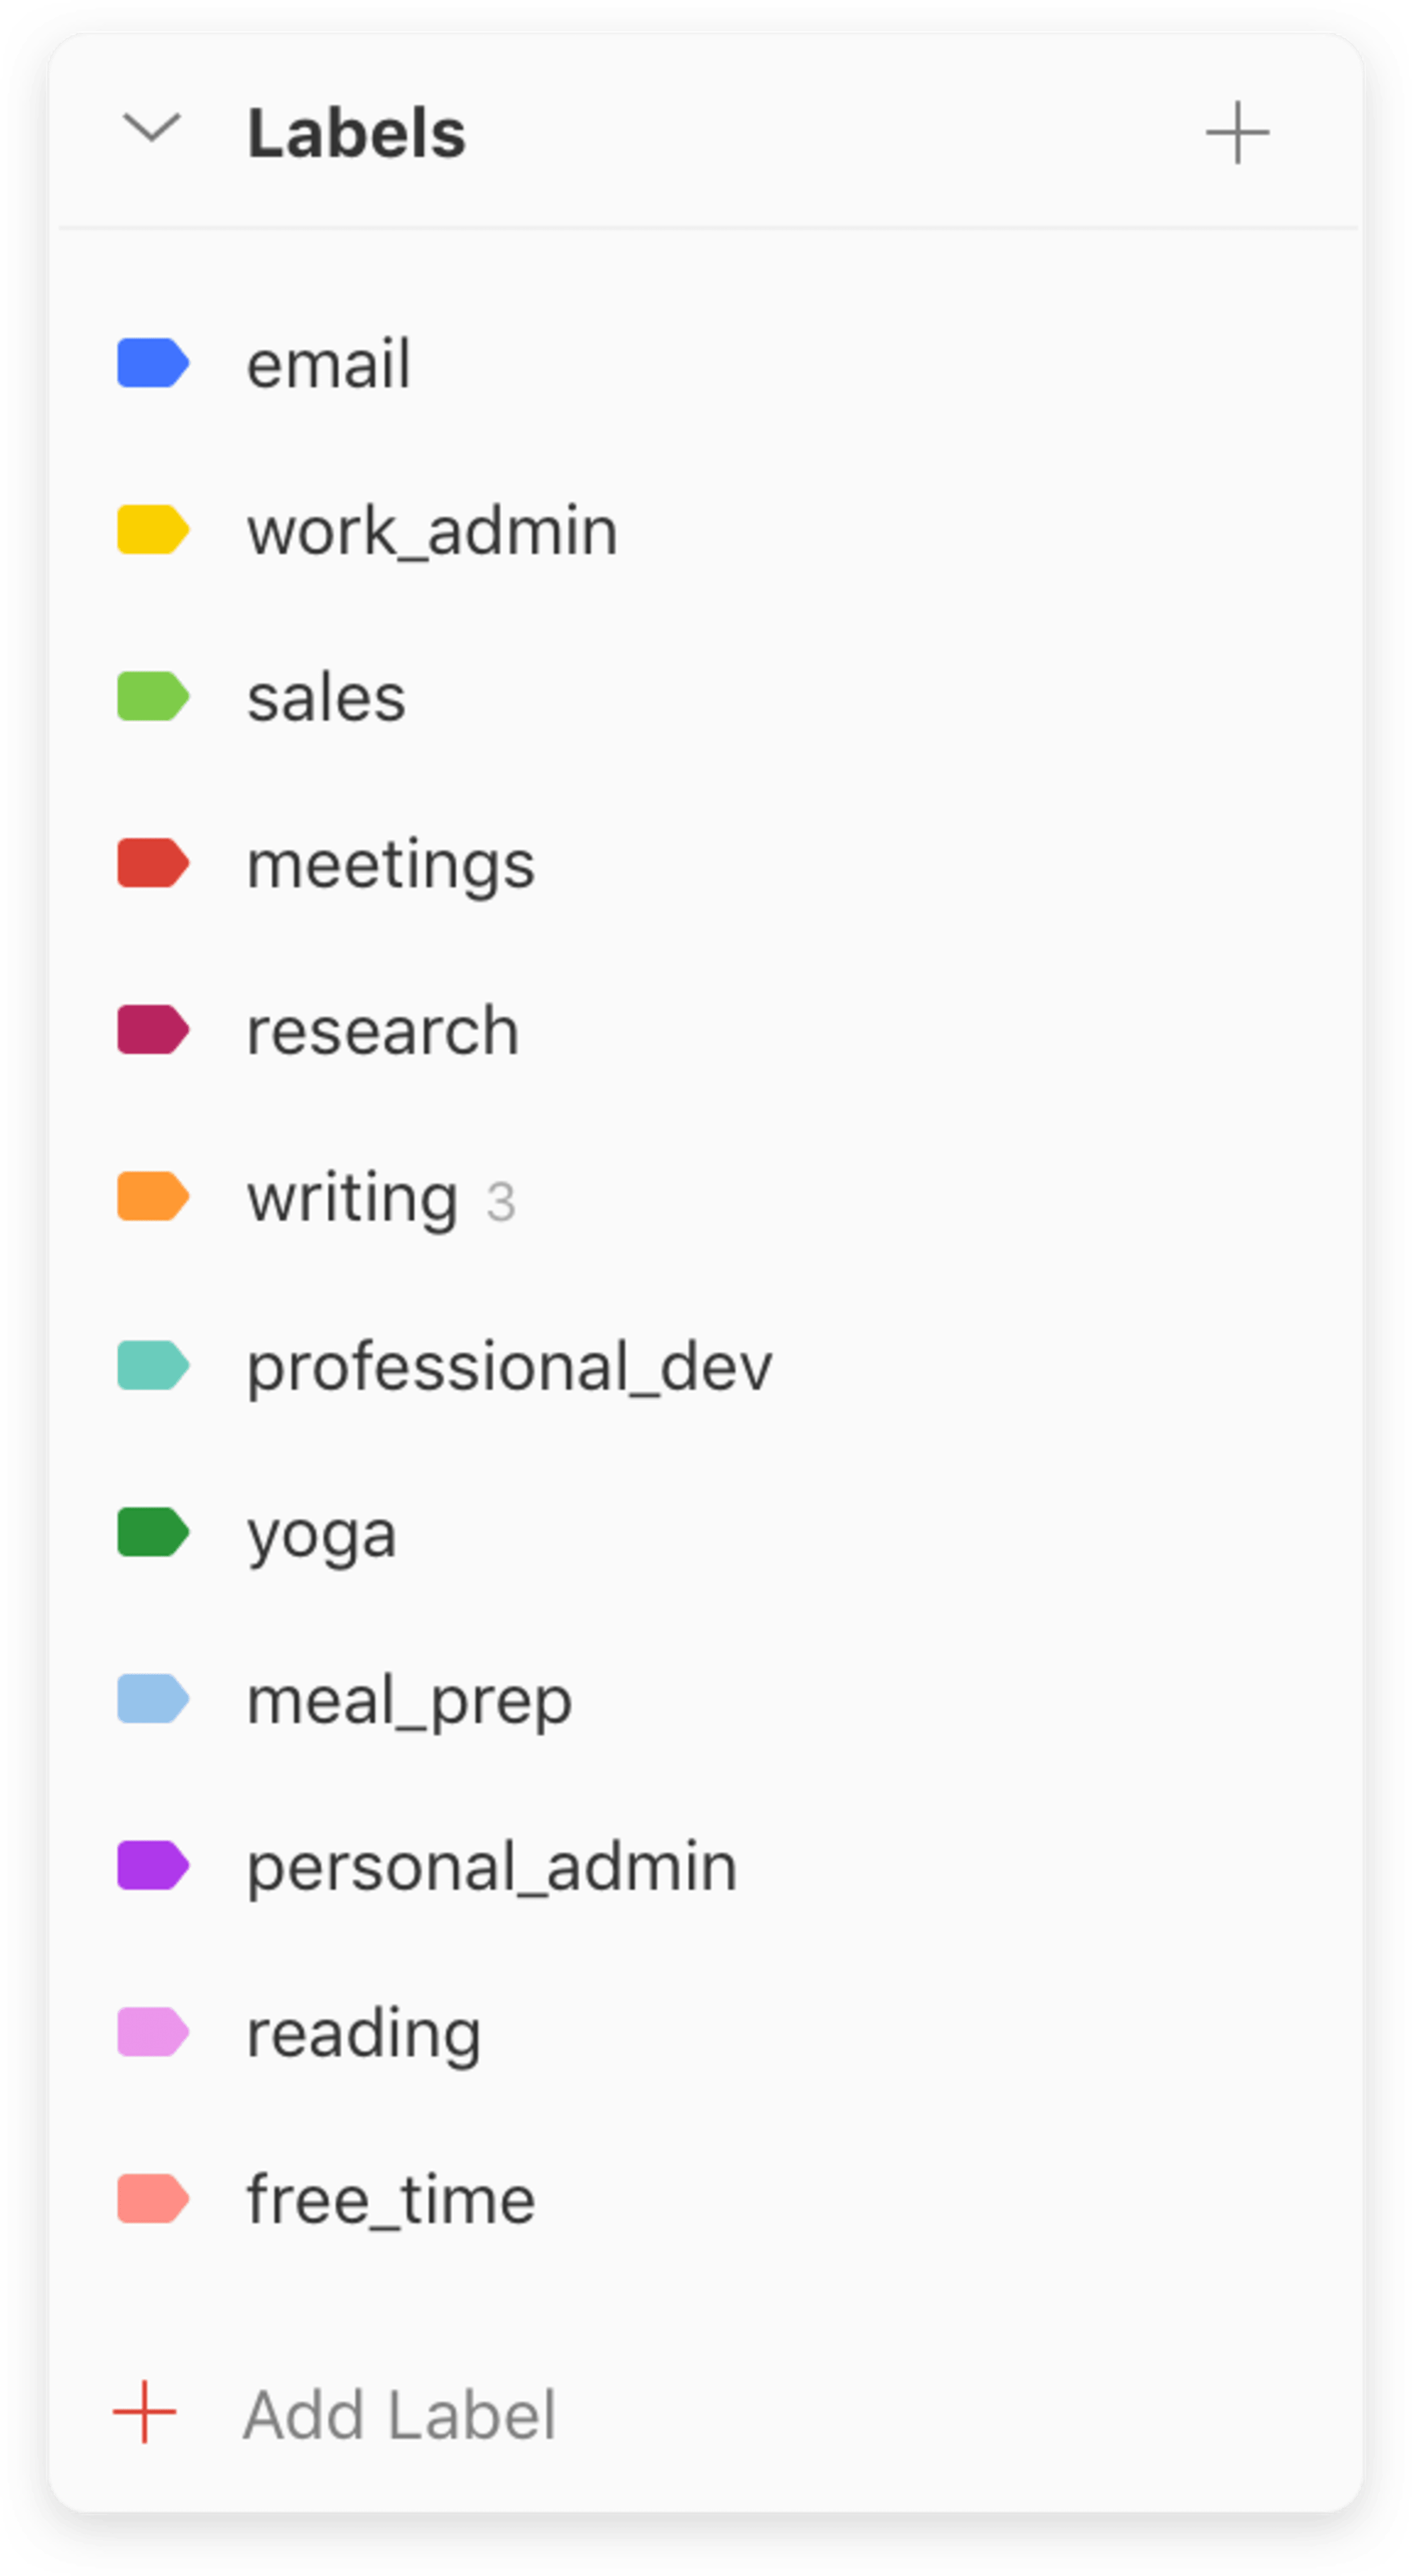 List of Todoist labels to categorize and batch tasks